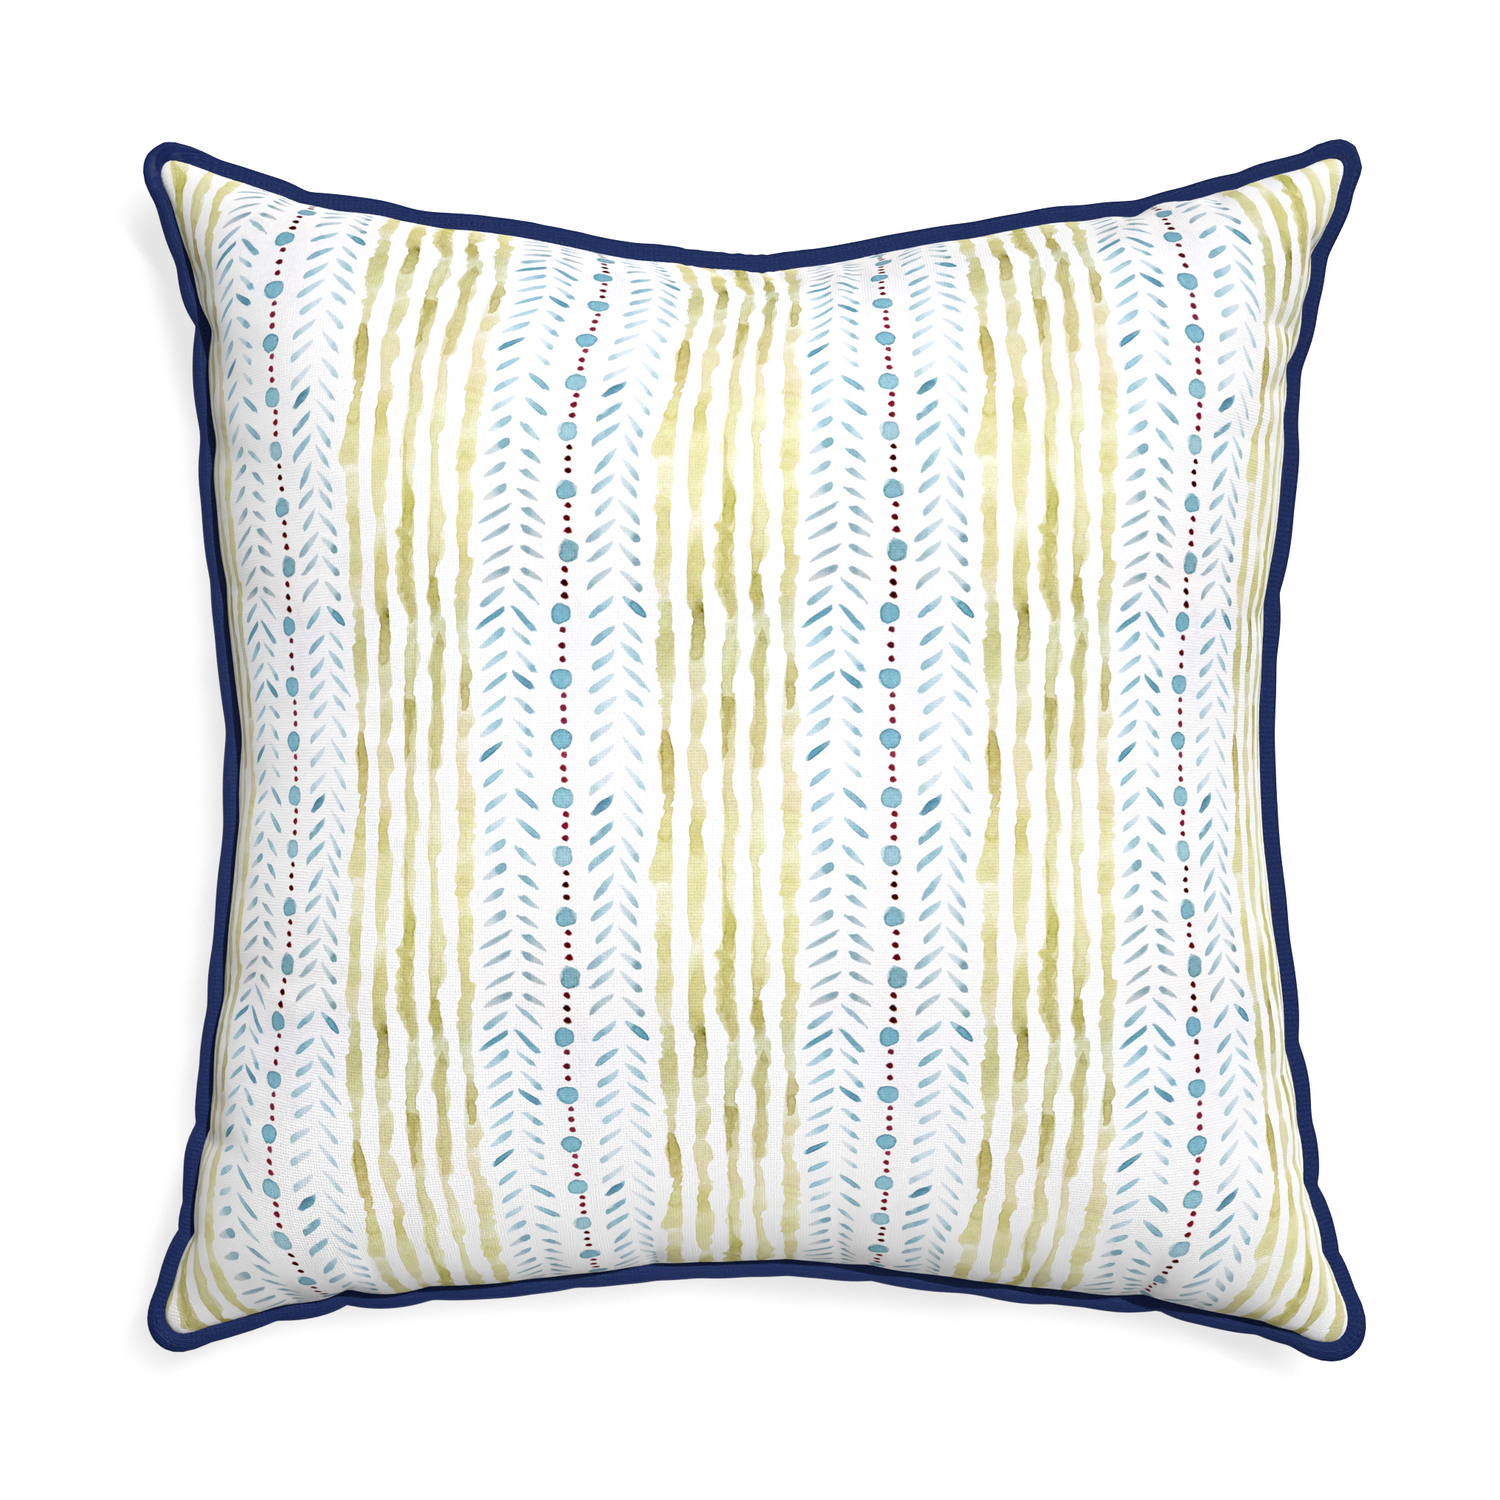 Euro-sham julia custom pillow with midnight piping on white background